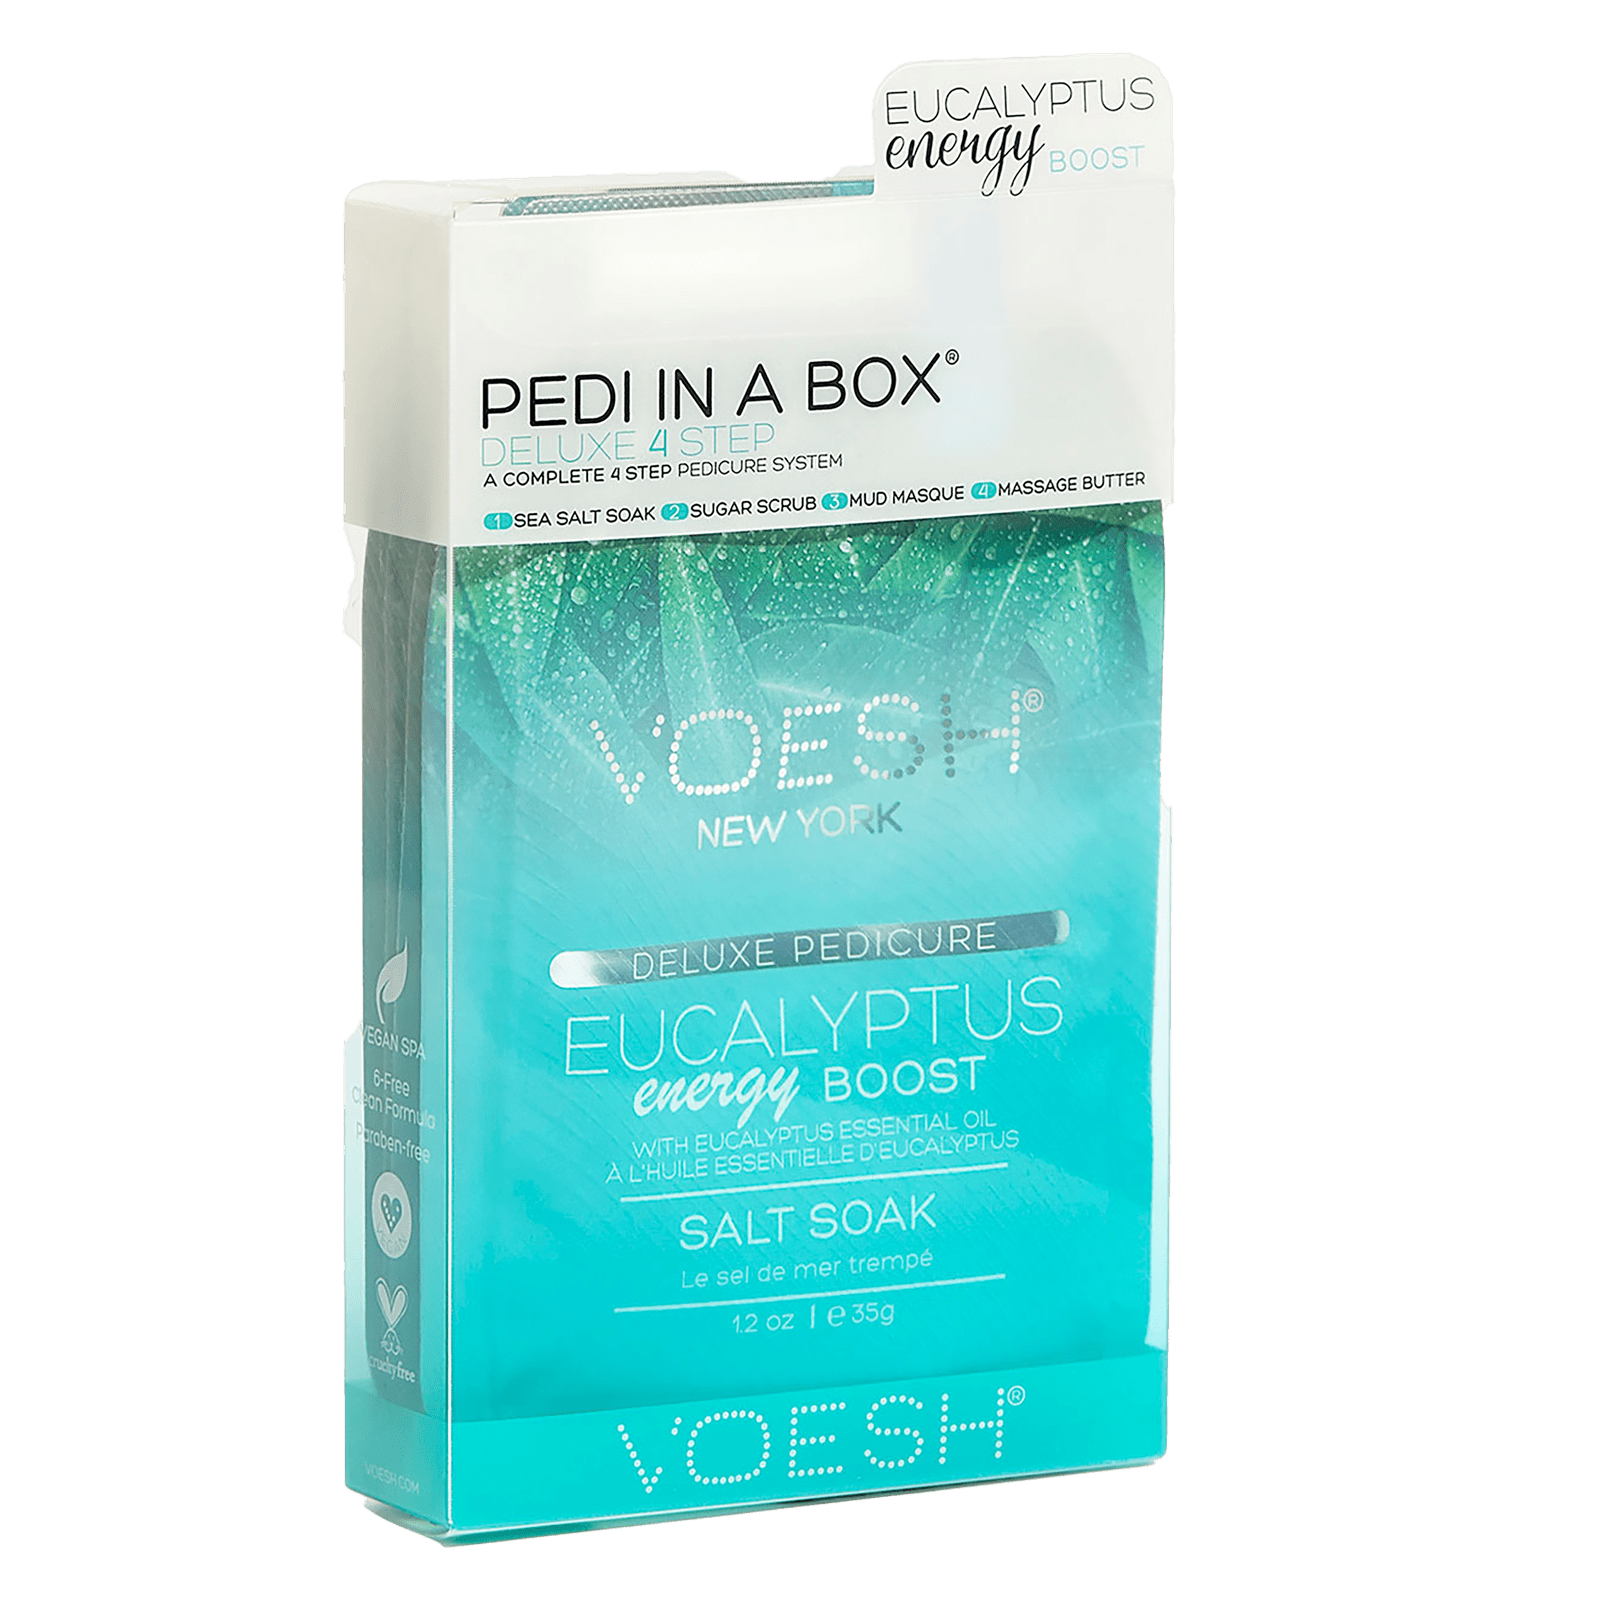 Voesh - Pedi in a Box Deluxe 4 Step | Eucalyptus Energy Boost - Pack